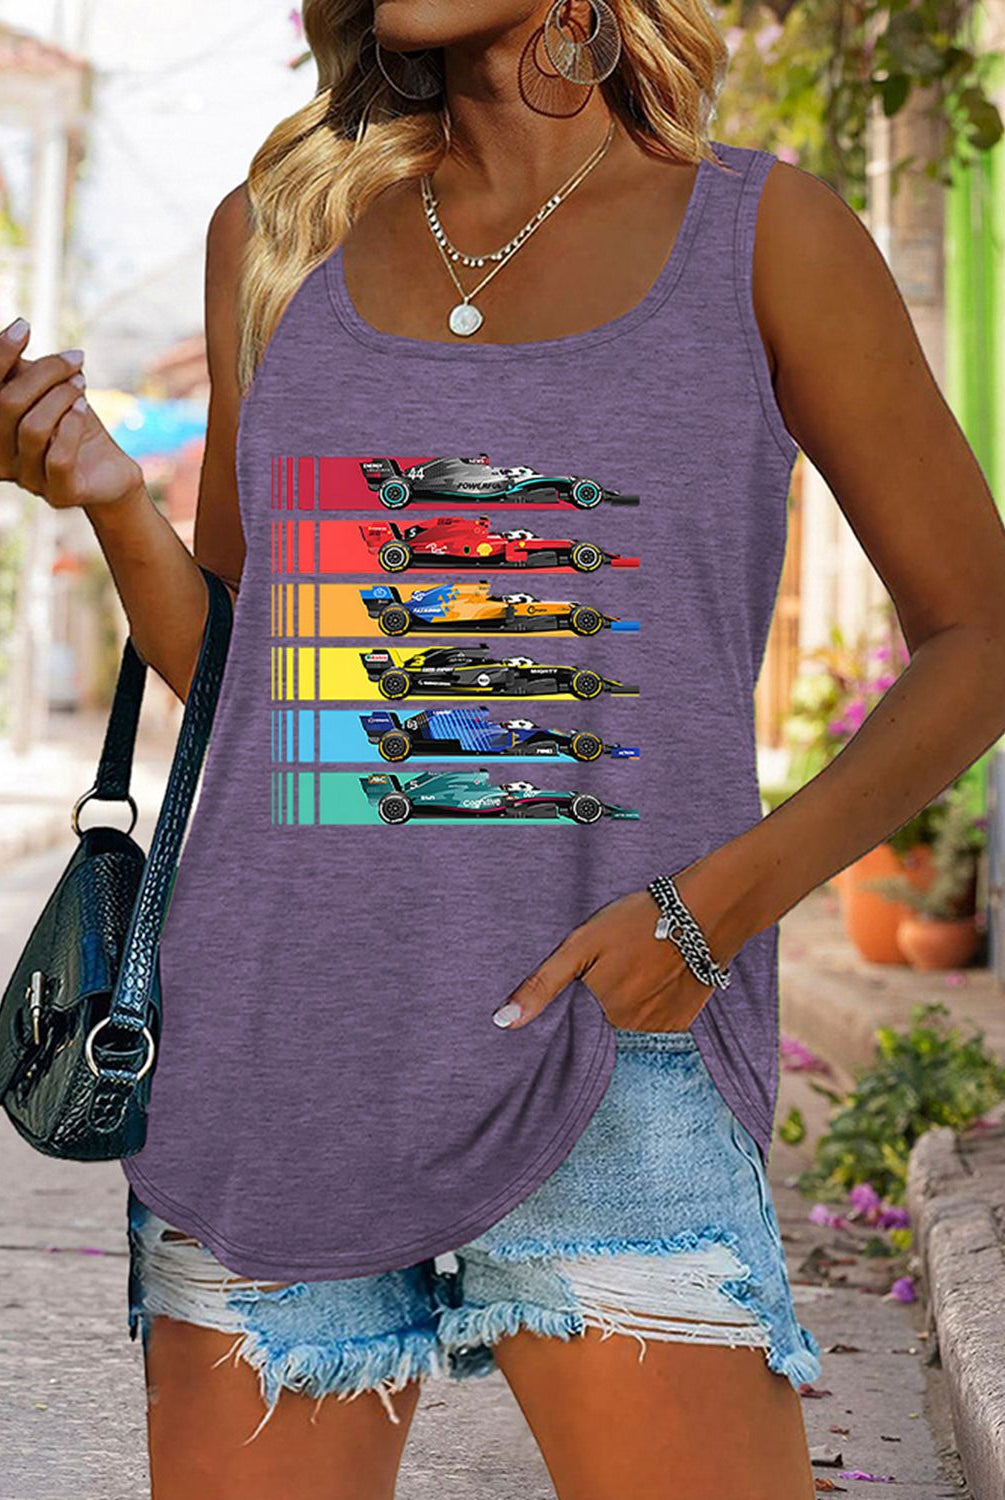 Dim Gray Scoop Neck Race Car Graphic Tank Top Graphic Tees